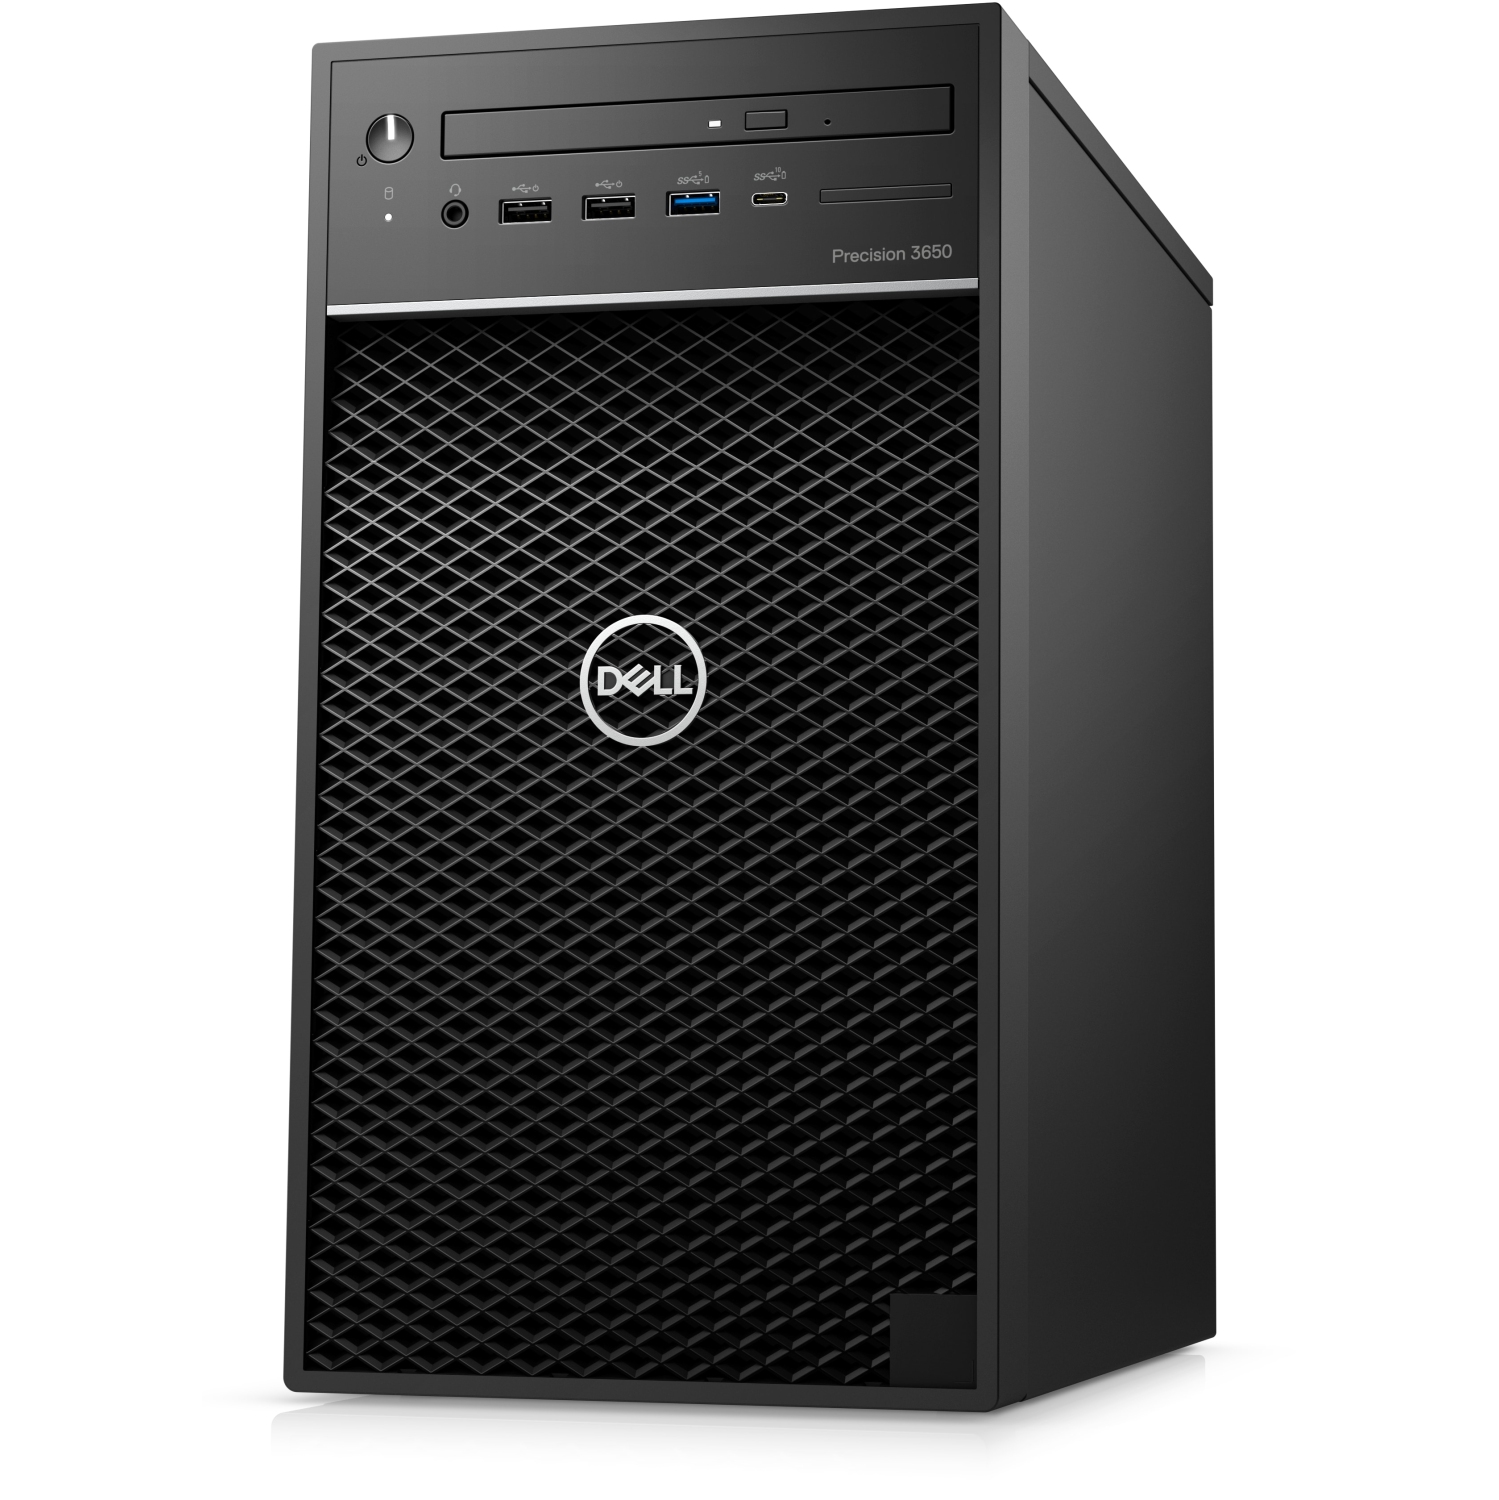 Refurbished (Excellent) - Dell Precision T3650 Workstation Desktop (2021), Core i7 - 1TB HDD - 32GB RAM - RTX 3090, 8 Cores @ 4.8 GHz - 10th Gen CPU Certified Refurbished